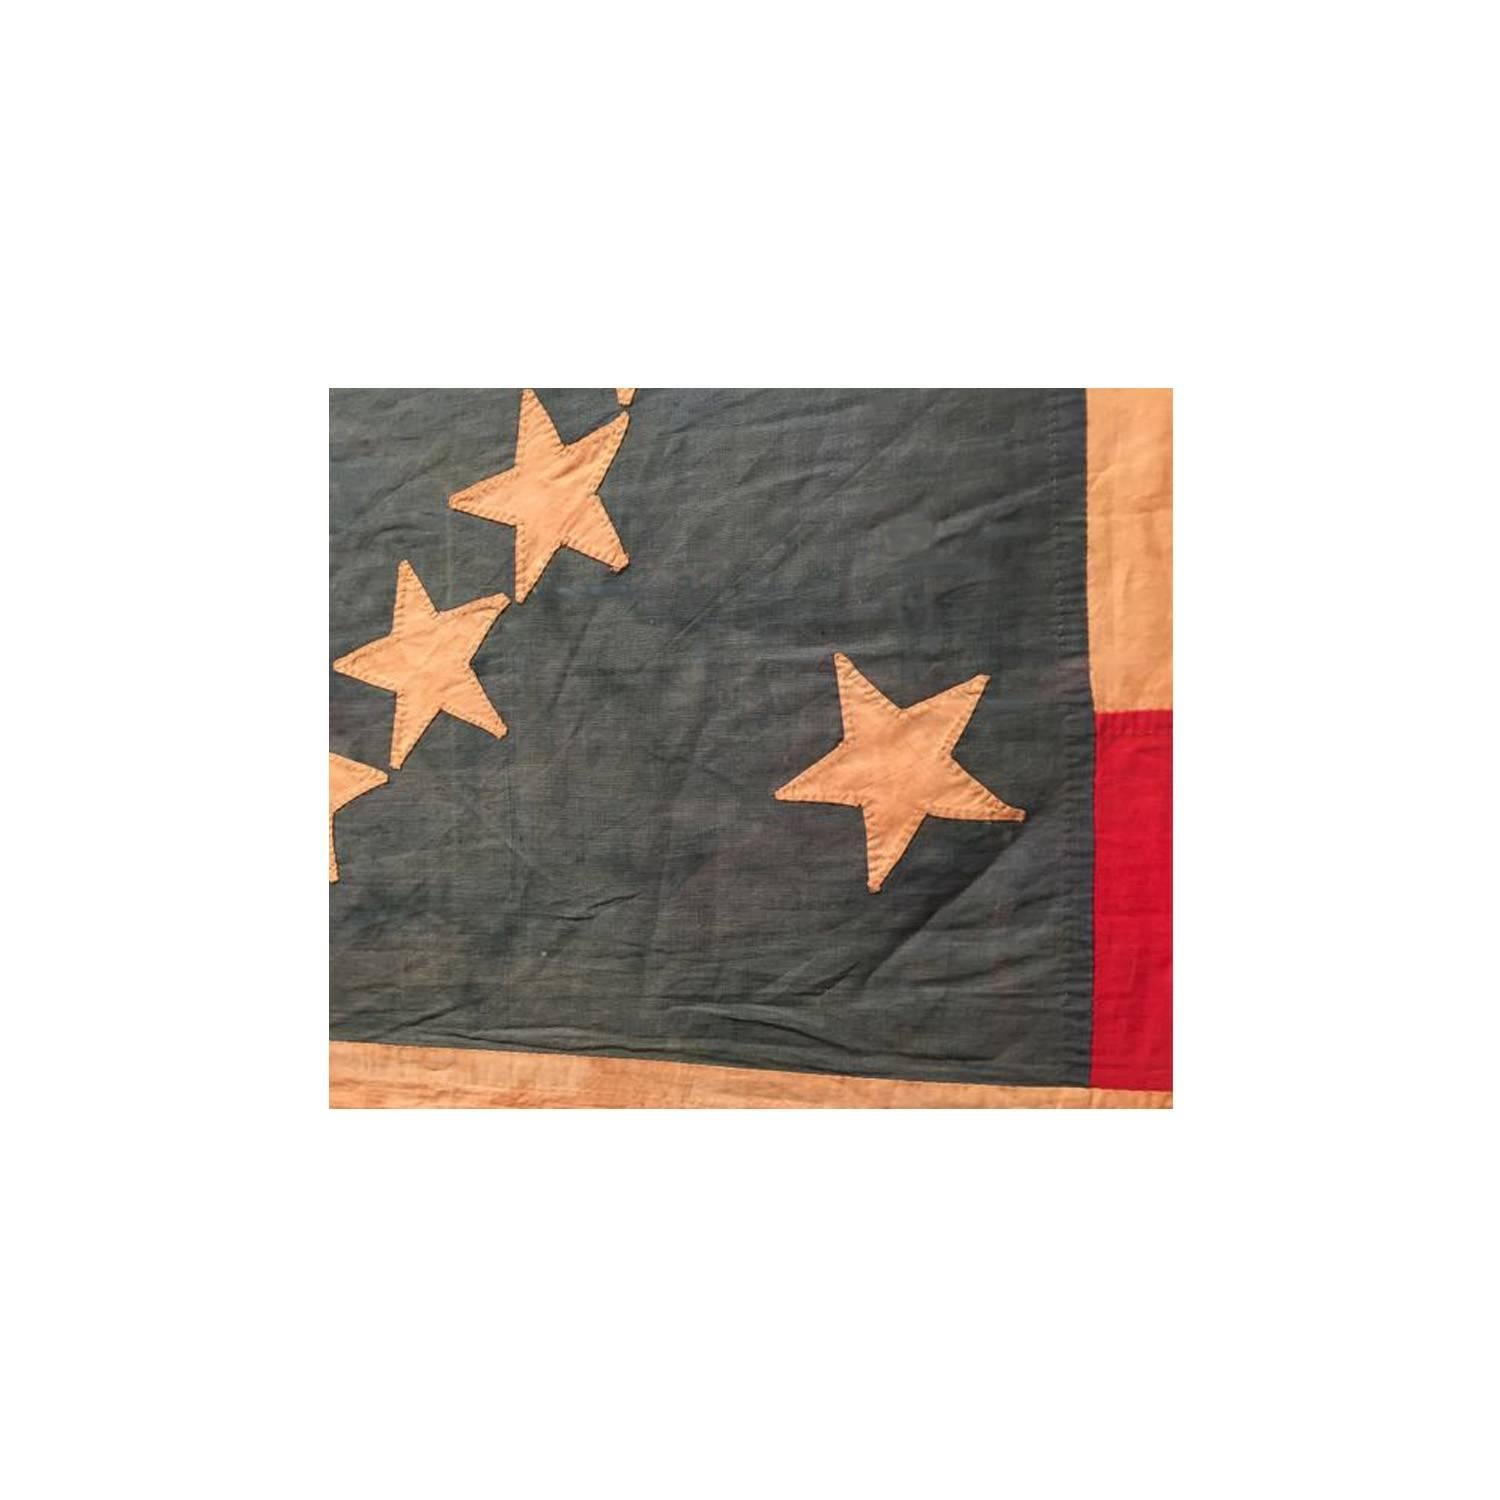 Antique 31 Star Flag, California flag.

Spectacular, extraordinarily rare star arrangement for any antique flag plus the fact that this flag has 31 Stars and 14 stripes making it even more rare. 31 Star flags are very seldom seen and are highly